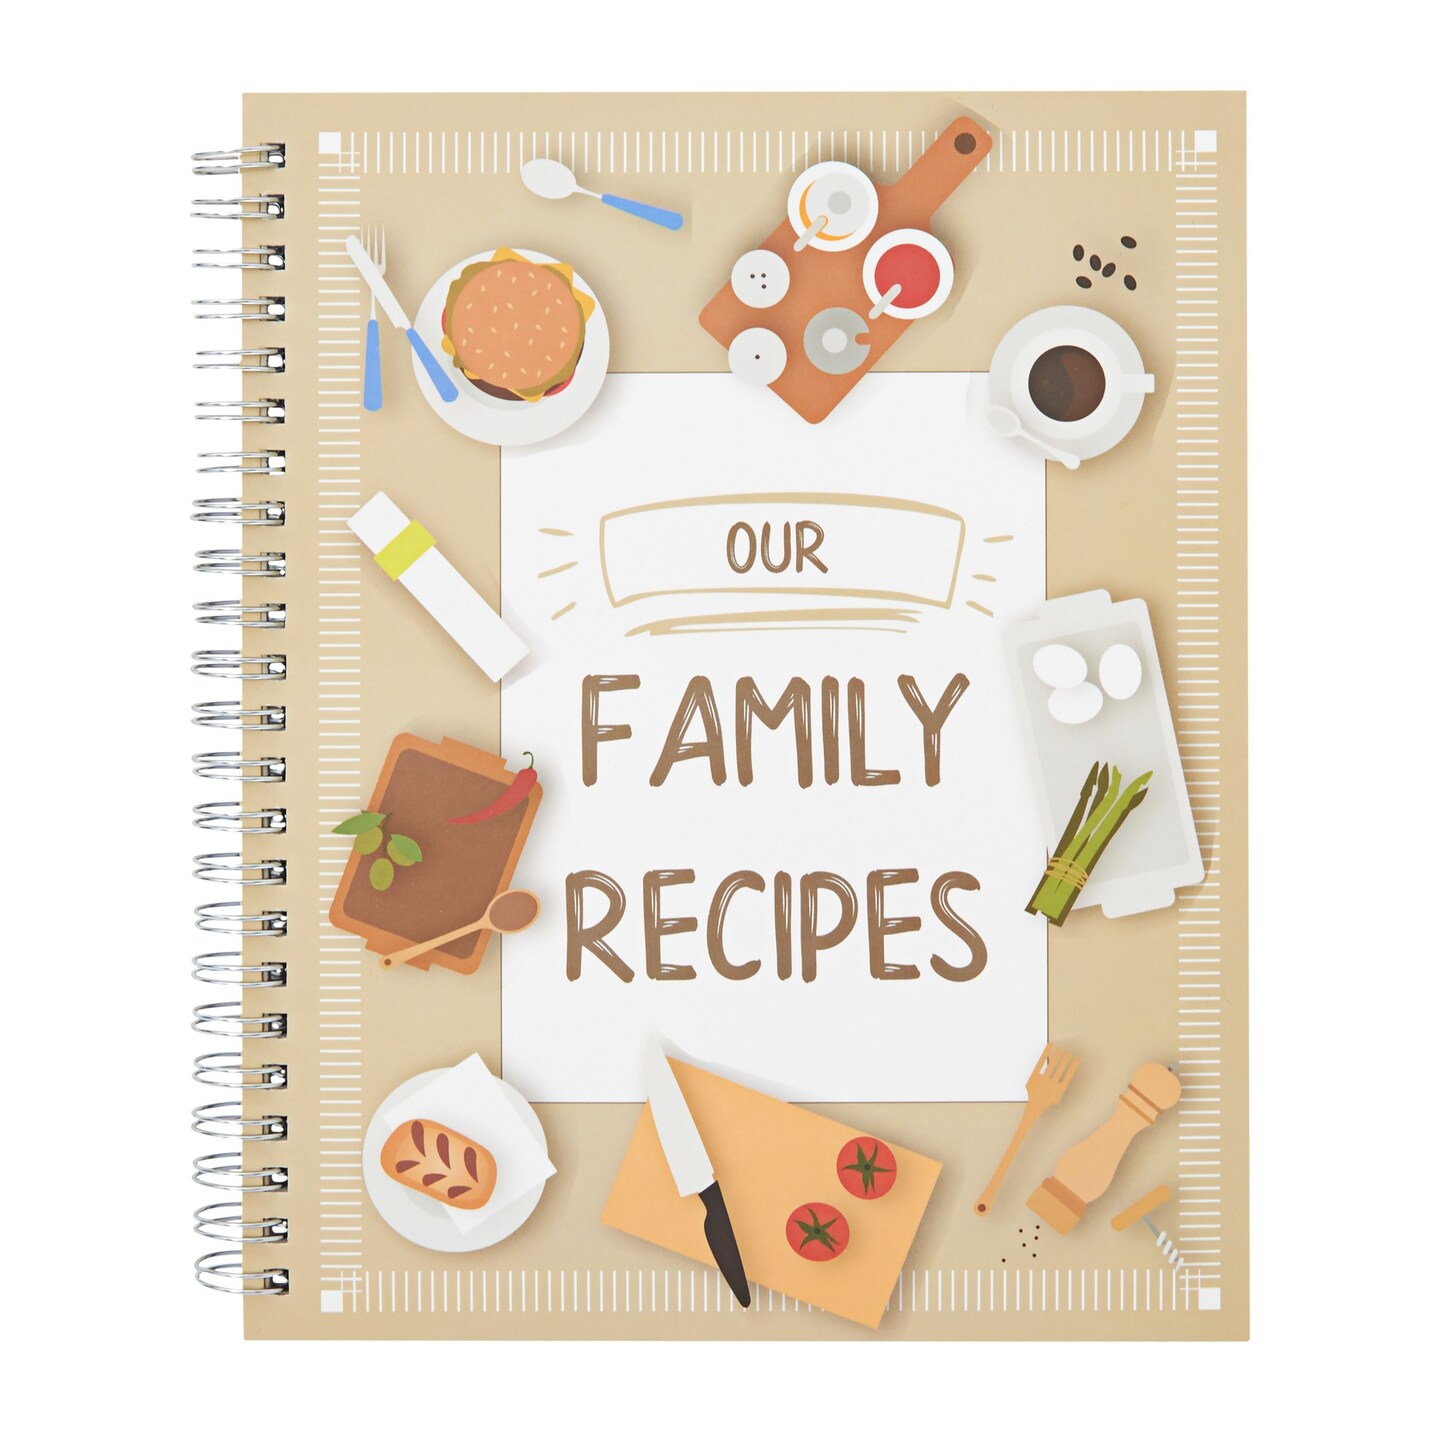 My Recipe Book To Write In: Make Your Own Cookbook - My Best Recipes And  Blank Recipe Book Journal For Personalized Recipes - Blank Recipe Journal  And Organizer For Recipes - ClevJournal: 9781796704686 - AbeBooks